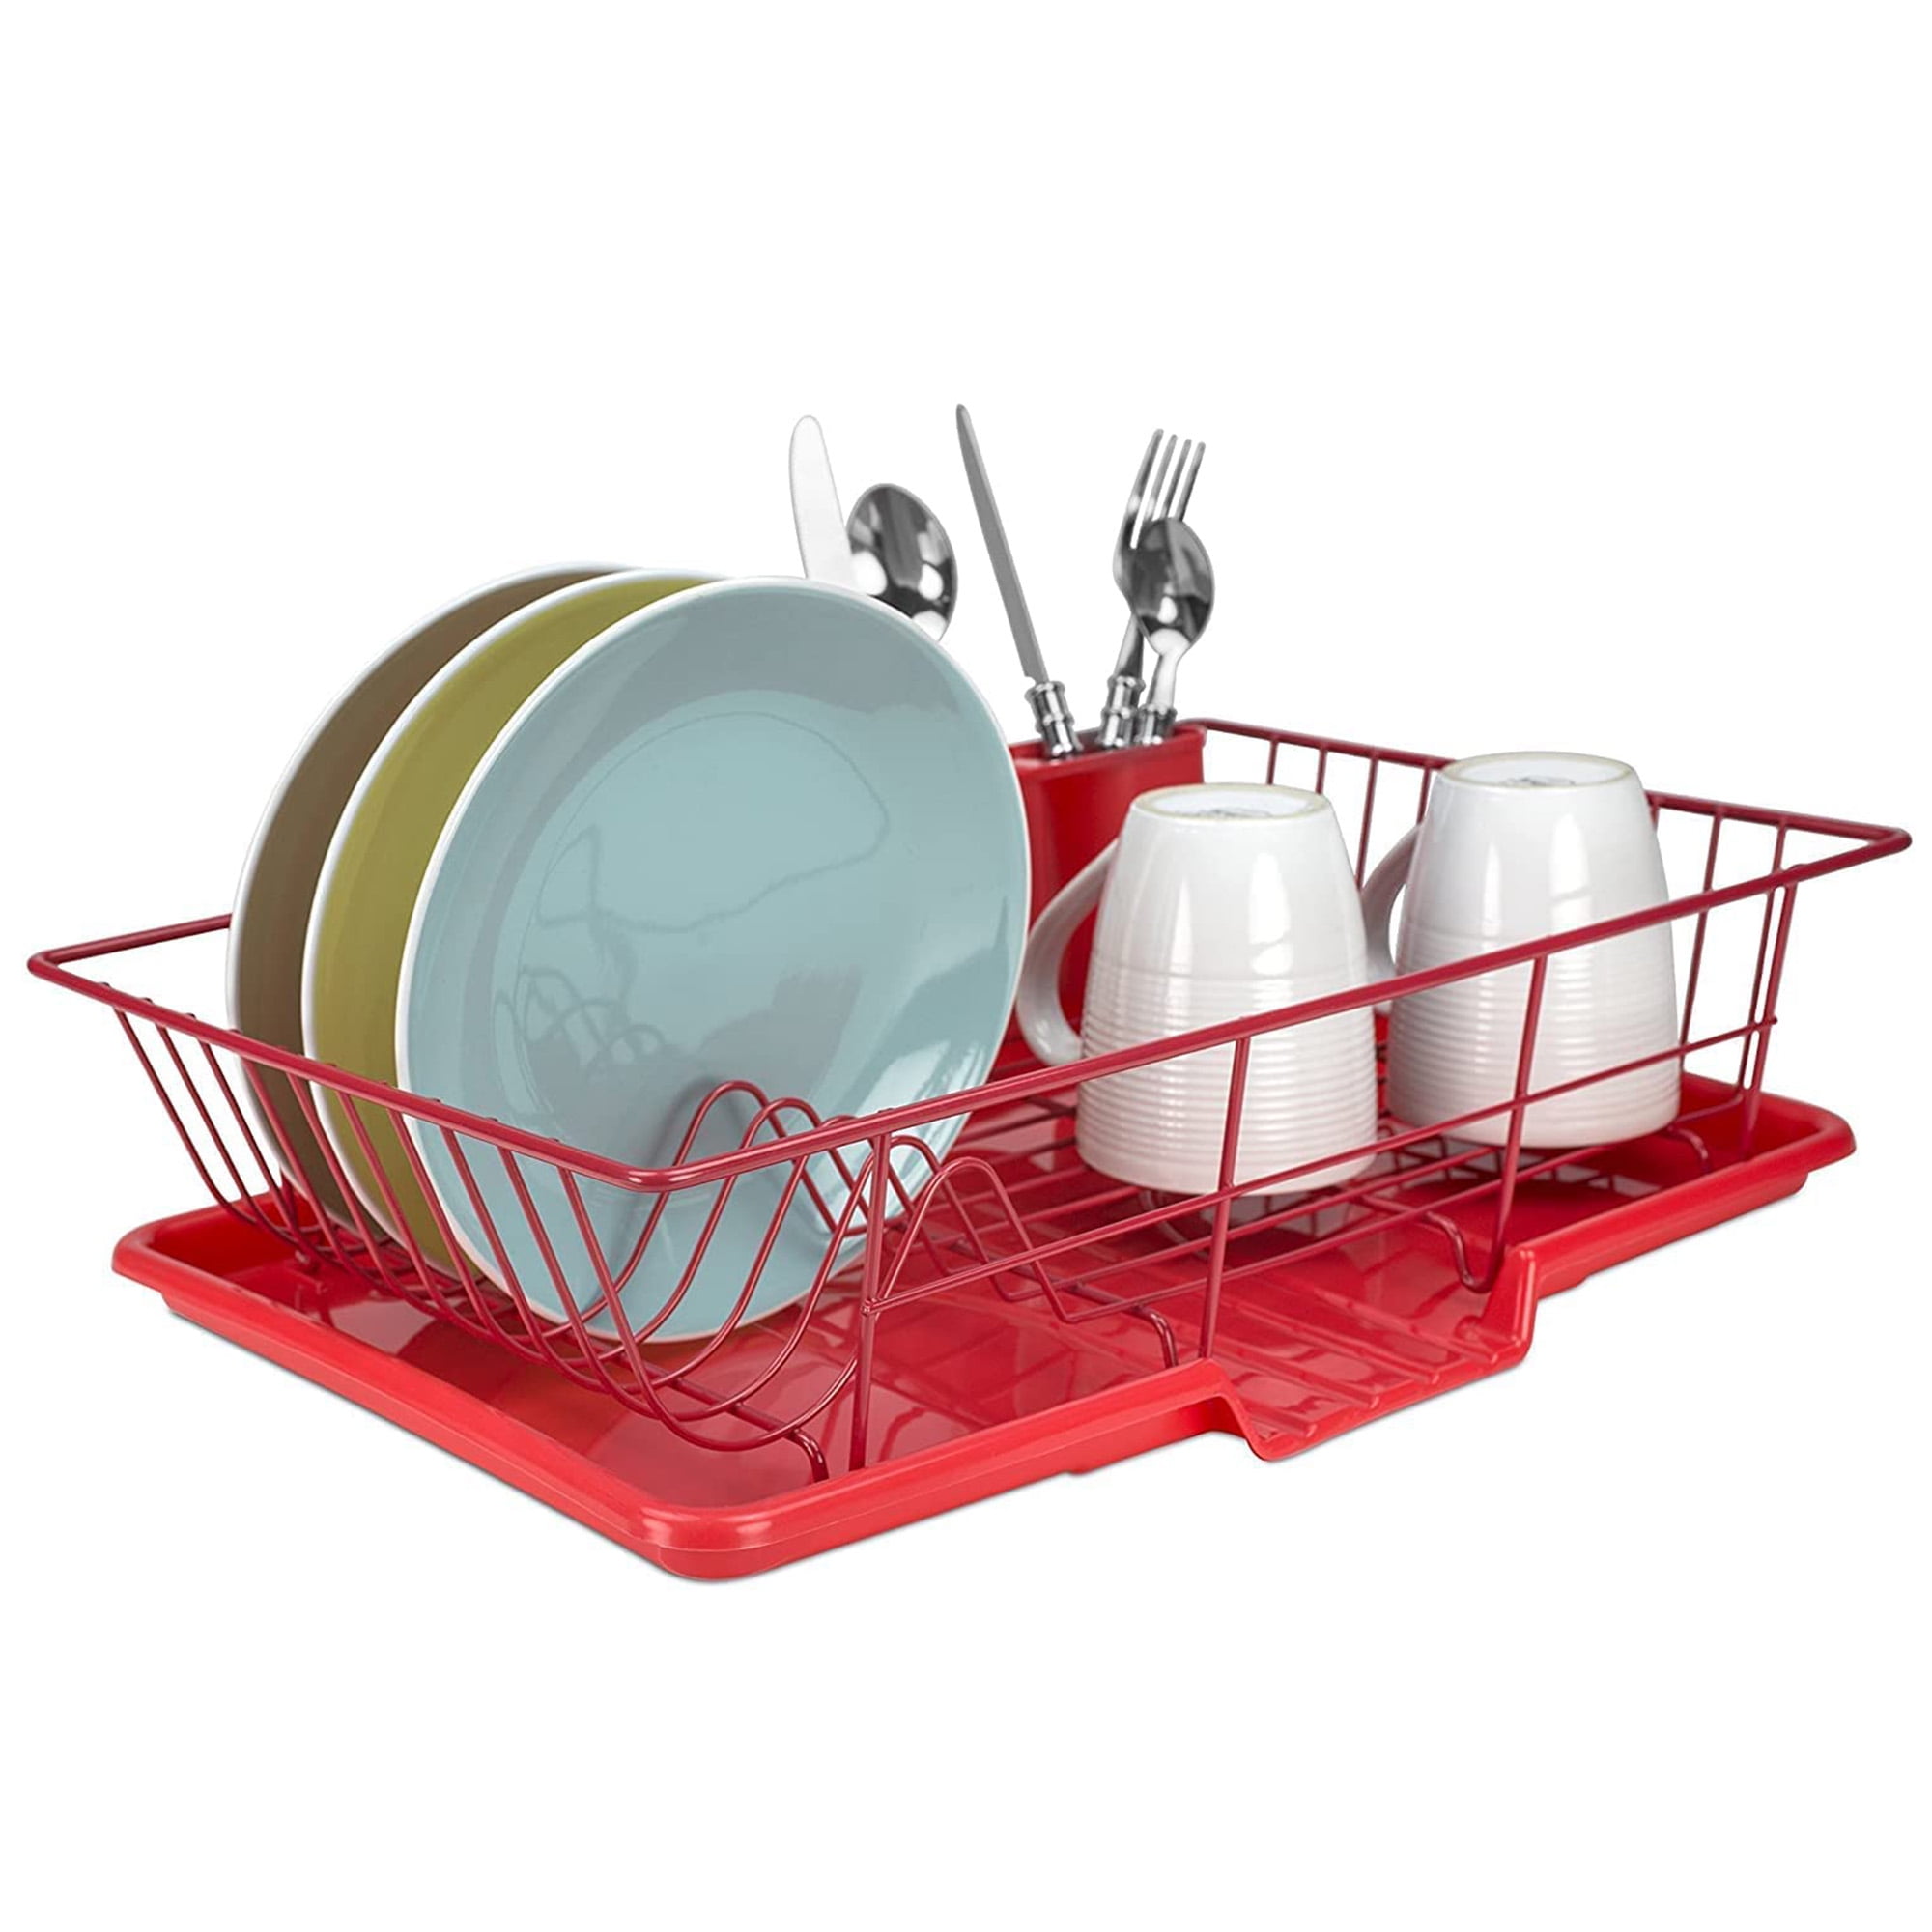 SuperOrganize Dish Drying Rack, Dish Rack with Drainboard, Kitchen